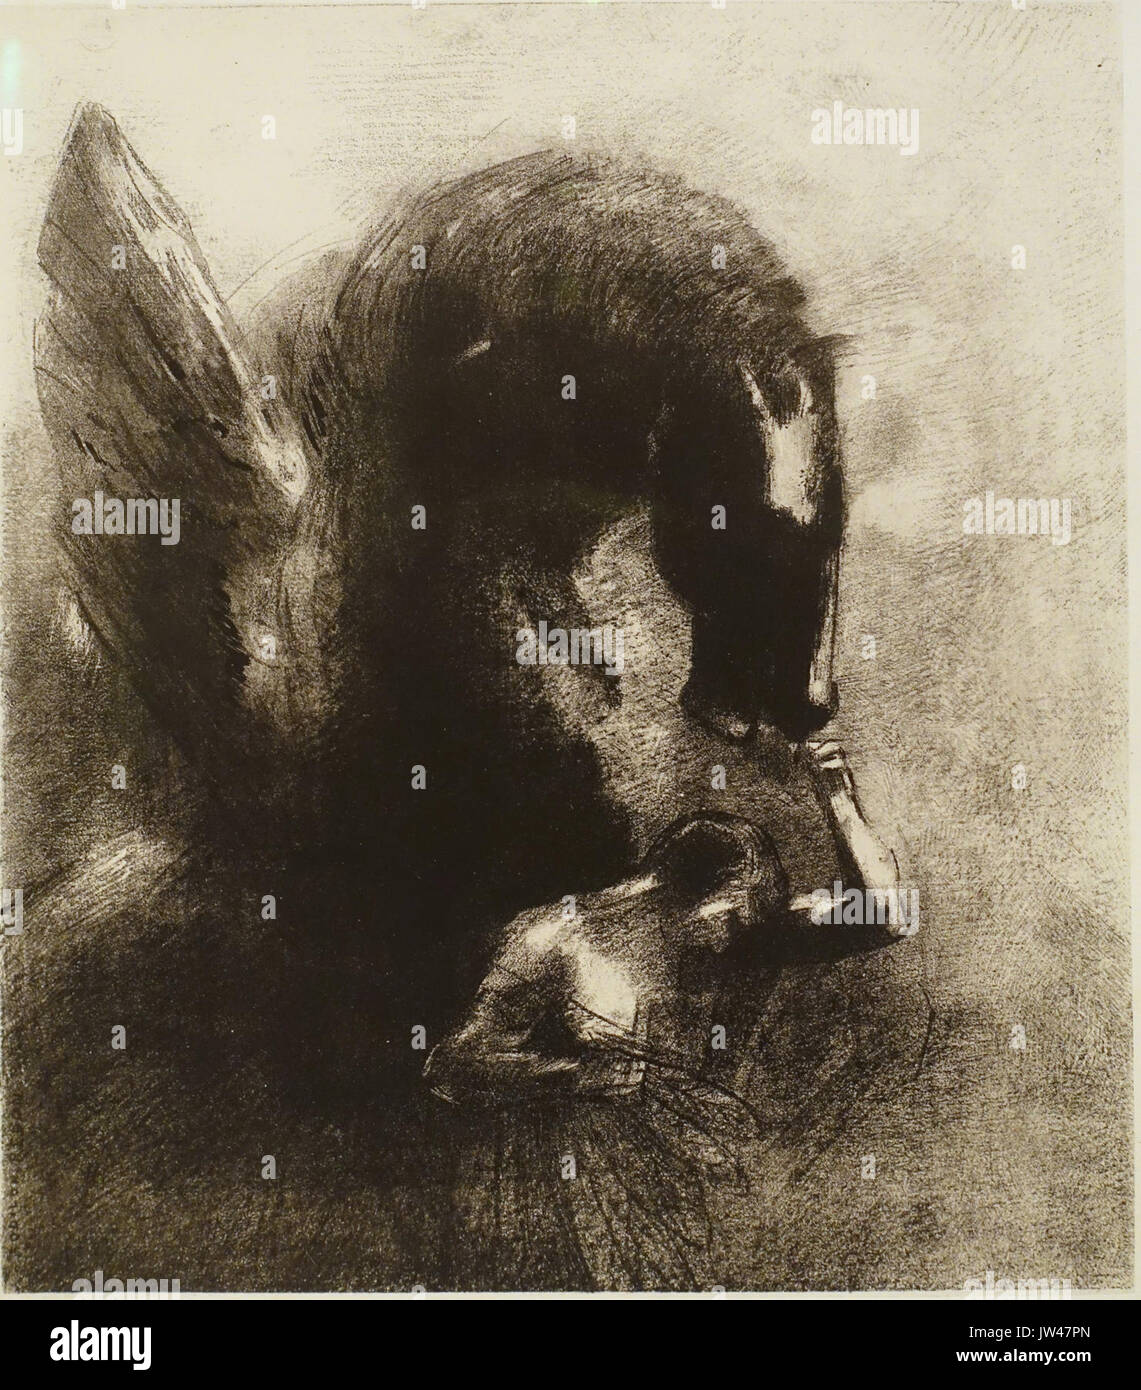 Captured Pegasus by Odilon Redon, 1889, lithograph   Scharf Gerstenberg Collection   DSC03877 Stock Photo